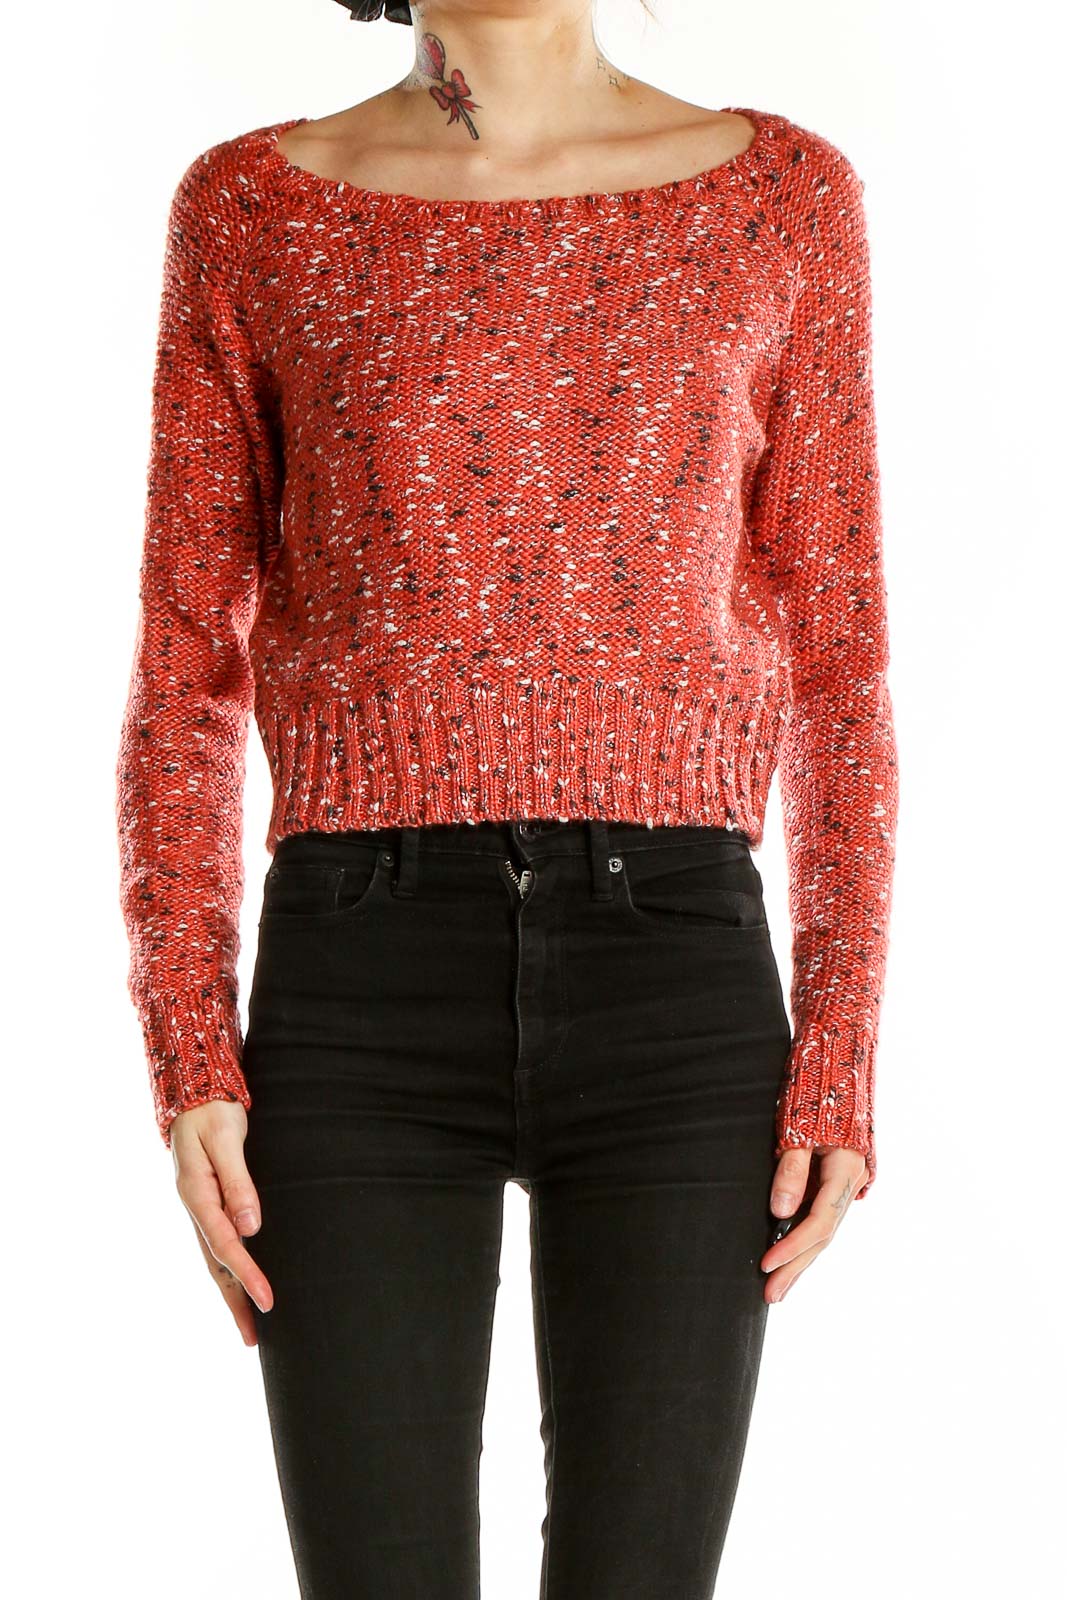 Red Black Speckle Sweater Front